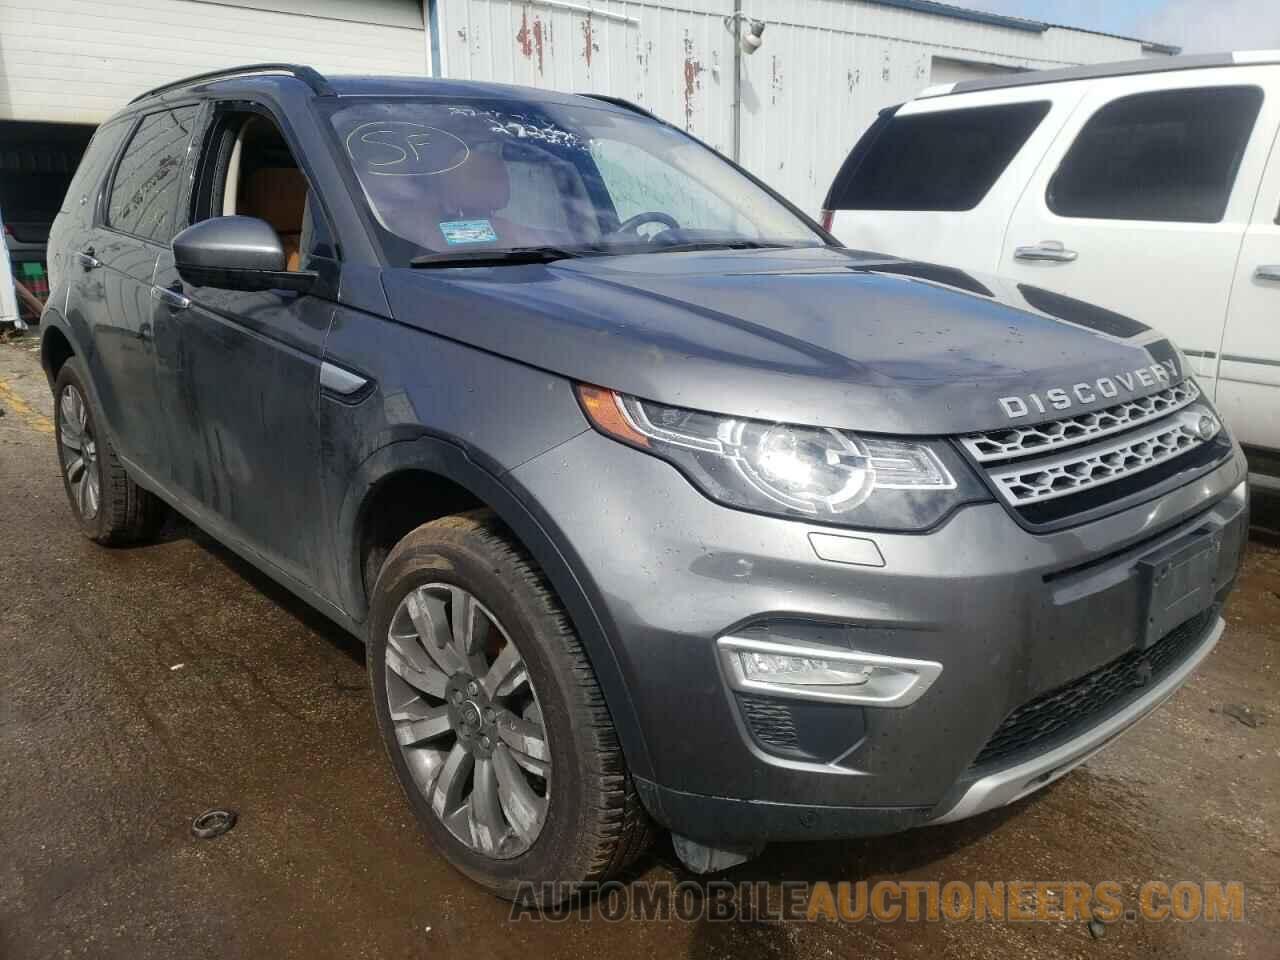 SALCT2RX0JH748369 LAND ROVER DISCOVERY 2018